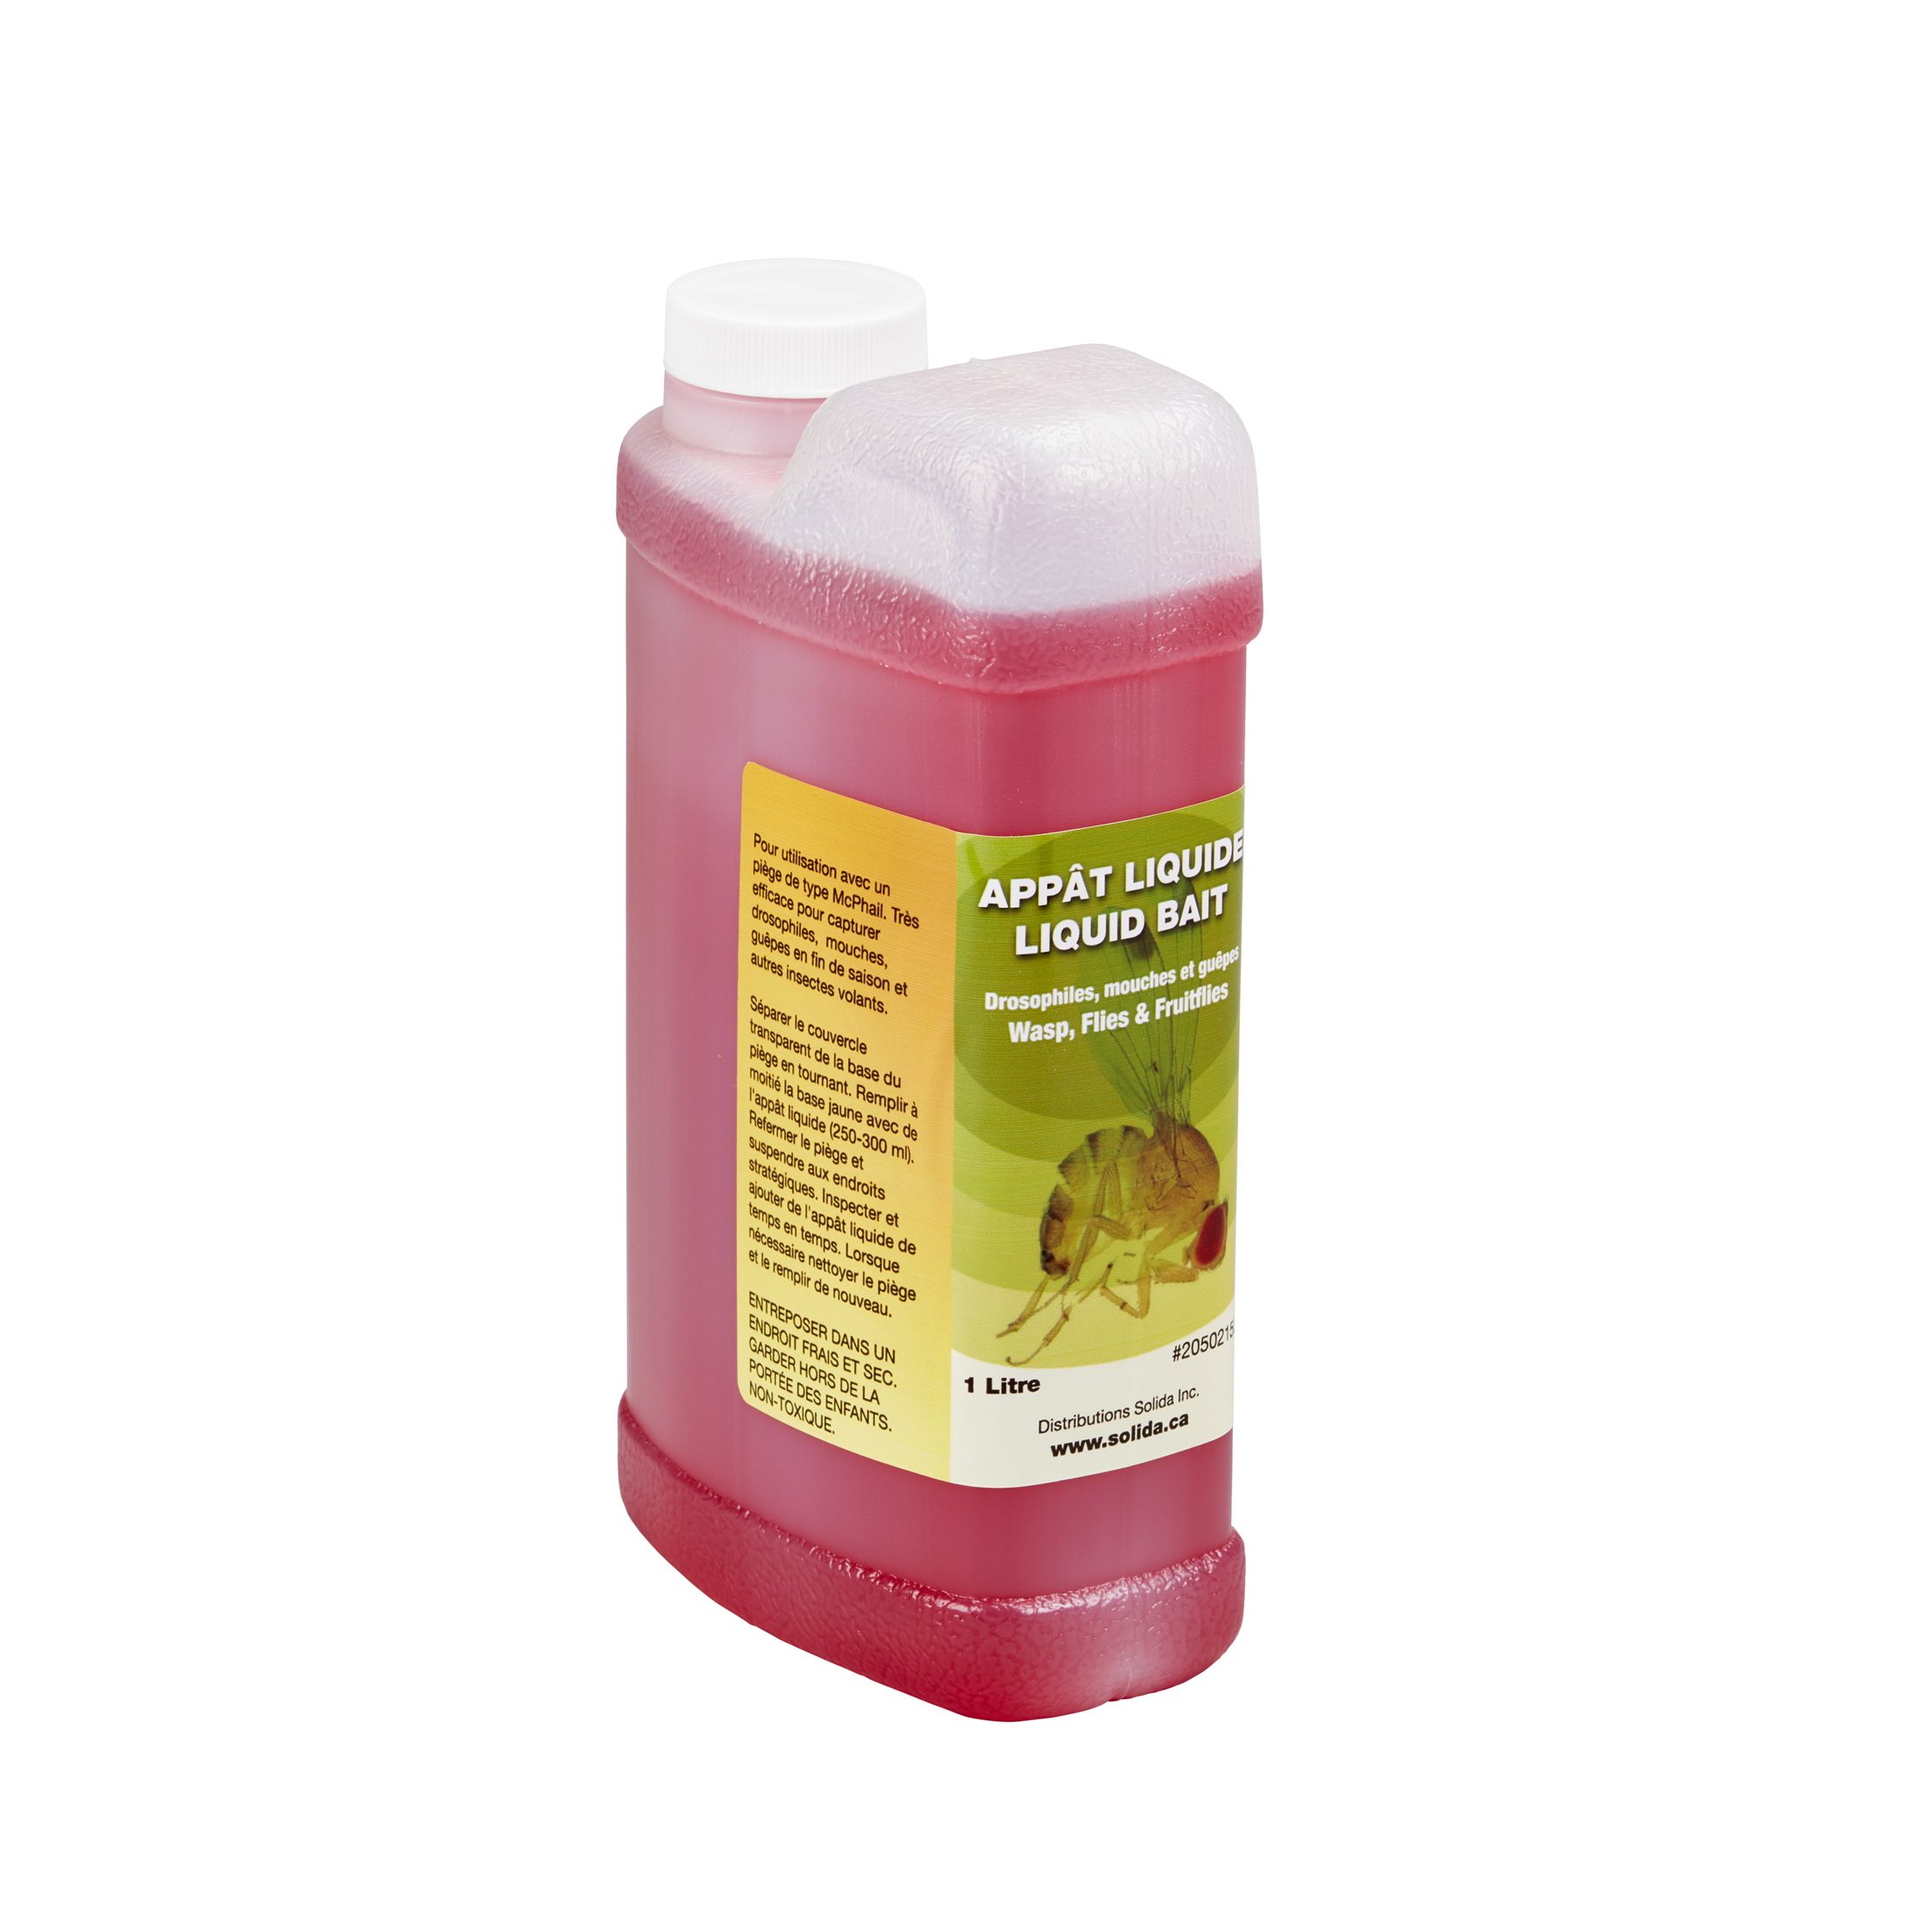 Liquid Bait for flying insects